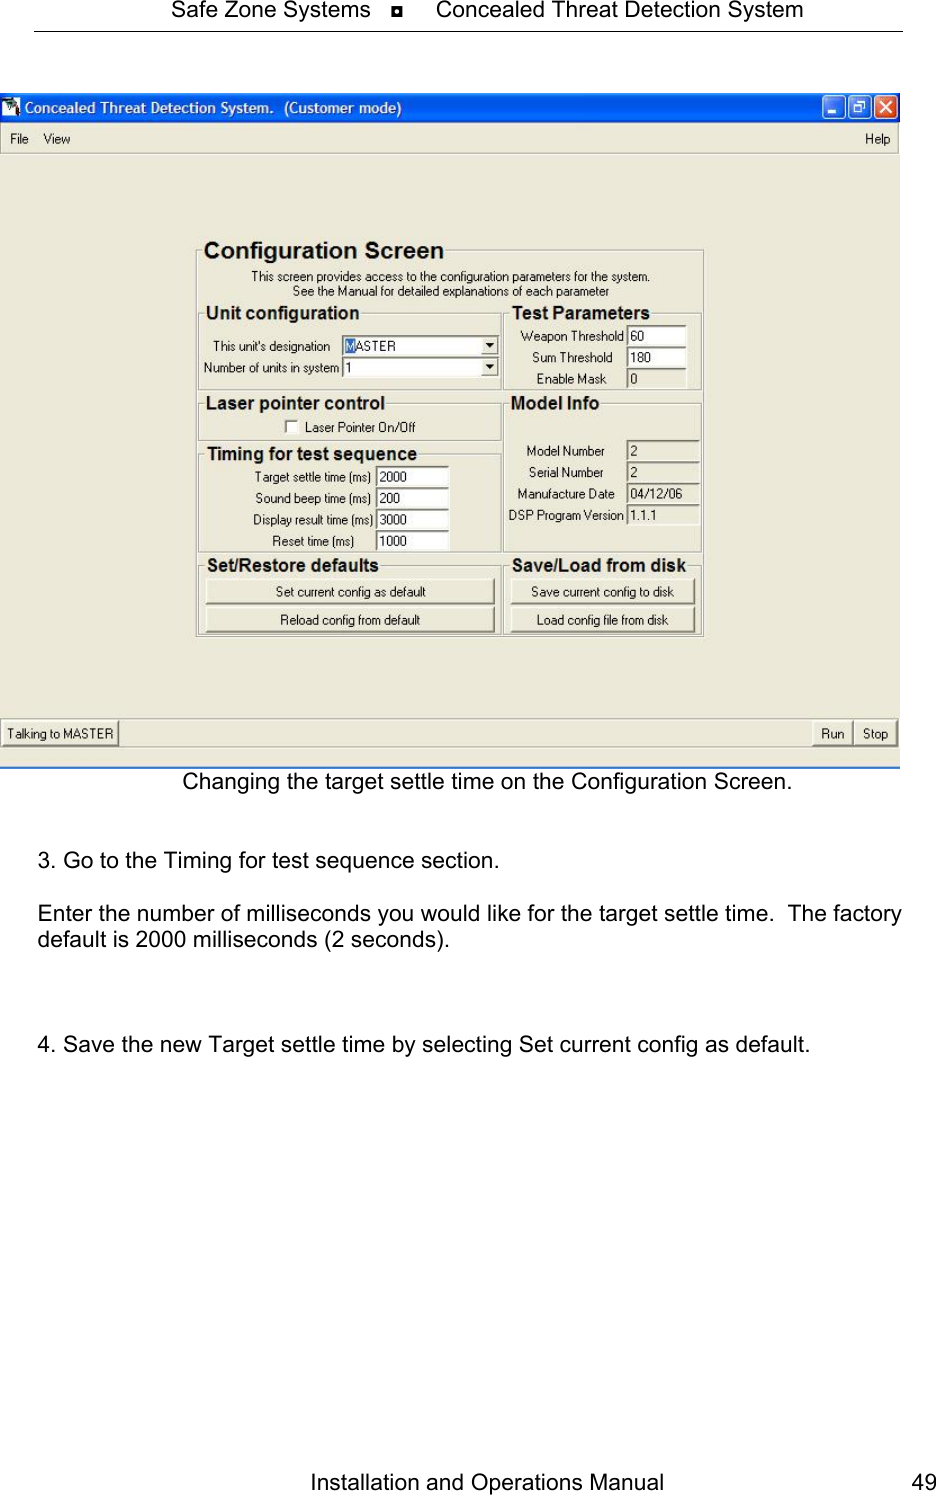 Safe Zone Systems   ◘     Concealed Threat Detection System  Installation and Operations Manual  49Changing the target settle time on the Configuration Screen.   3. Go to the Timing for test sequence section.  Enter the number of milliseconds you would like for the target settle time.  The factory default is 2000 milliseconds (2 seconds).    4. Save the new Target settle time by selecting Set current config as default. 